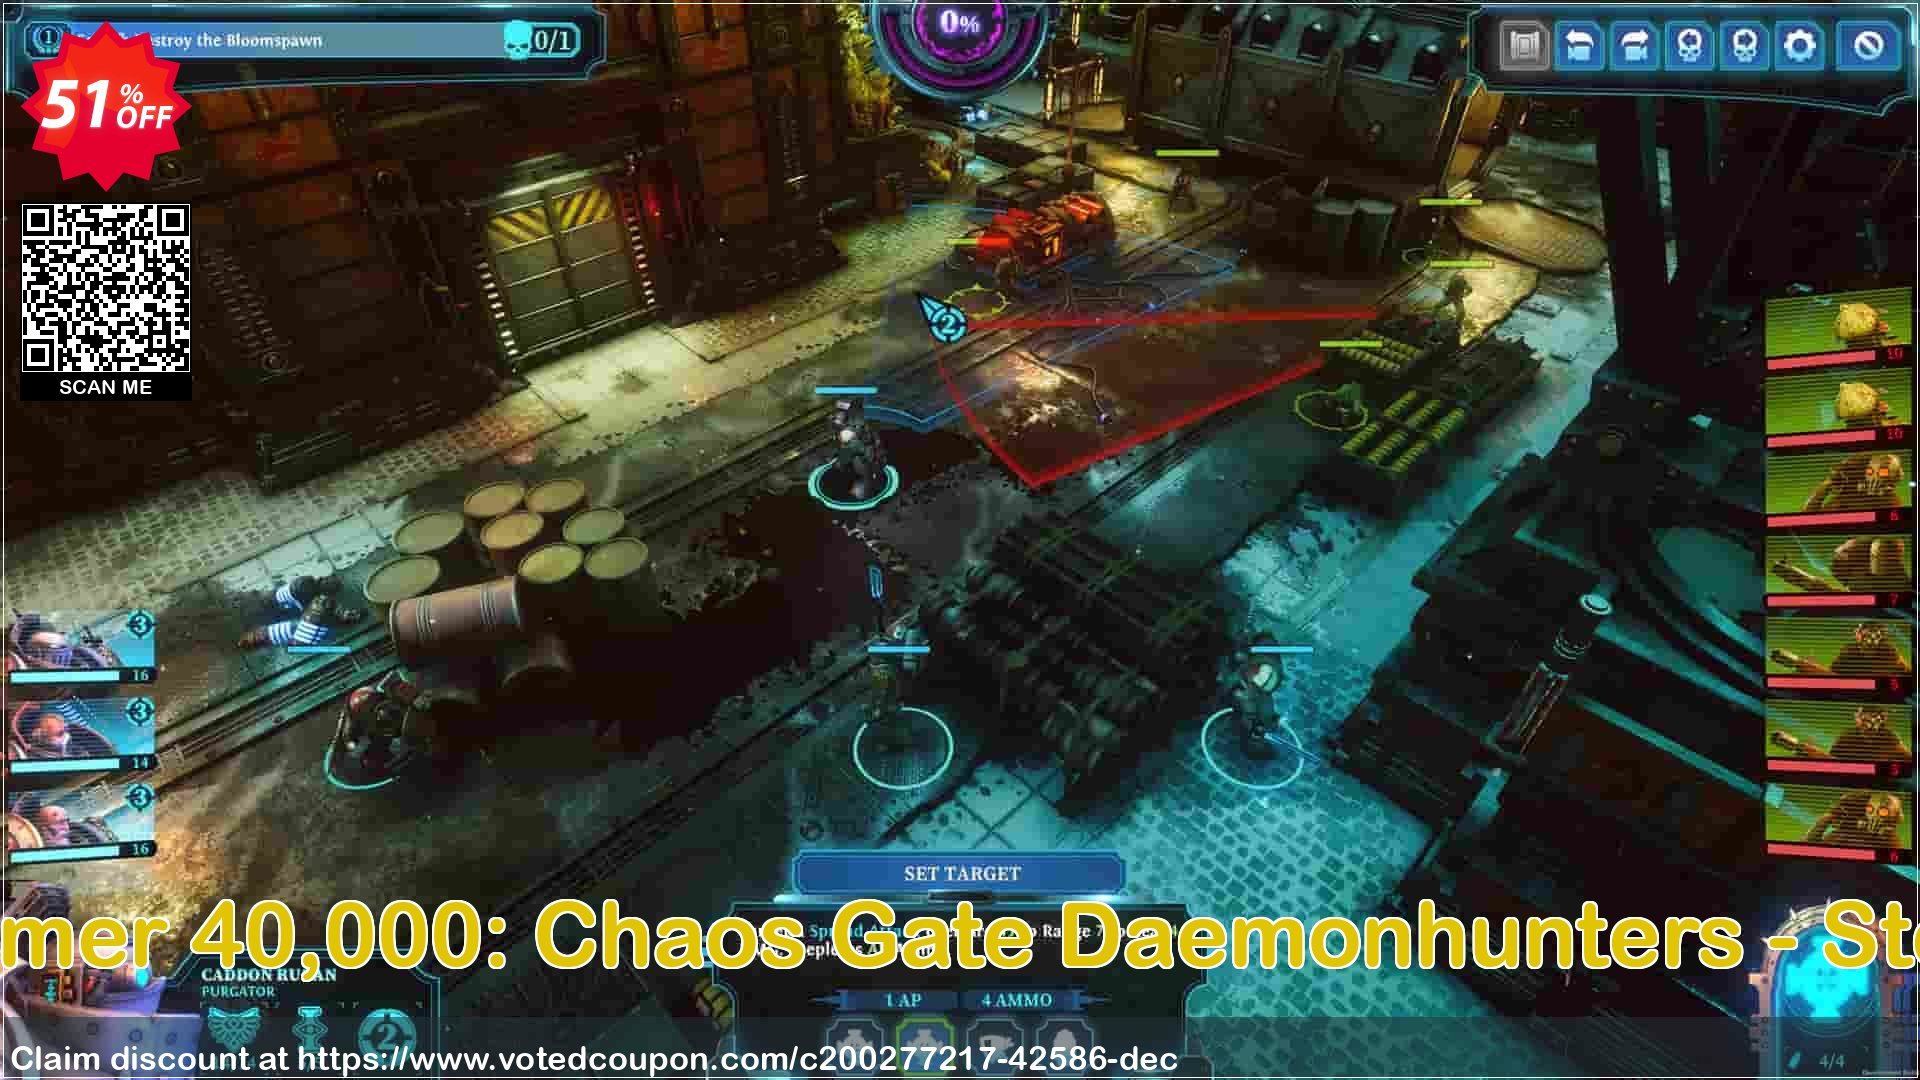 Warhammer 40,000: Chaos Gate Daemonhunters - Steam Key Coupon Code May 2024, 51% OFF - VotedCoupon